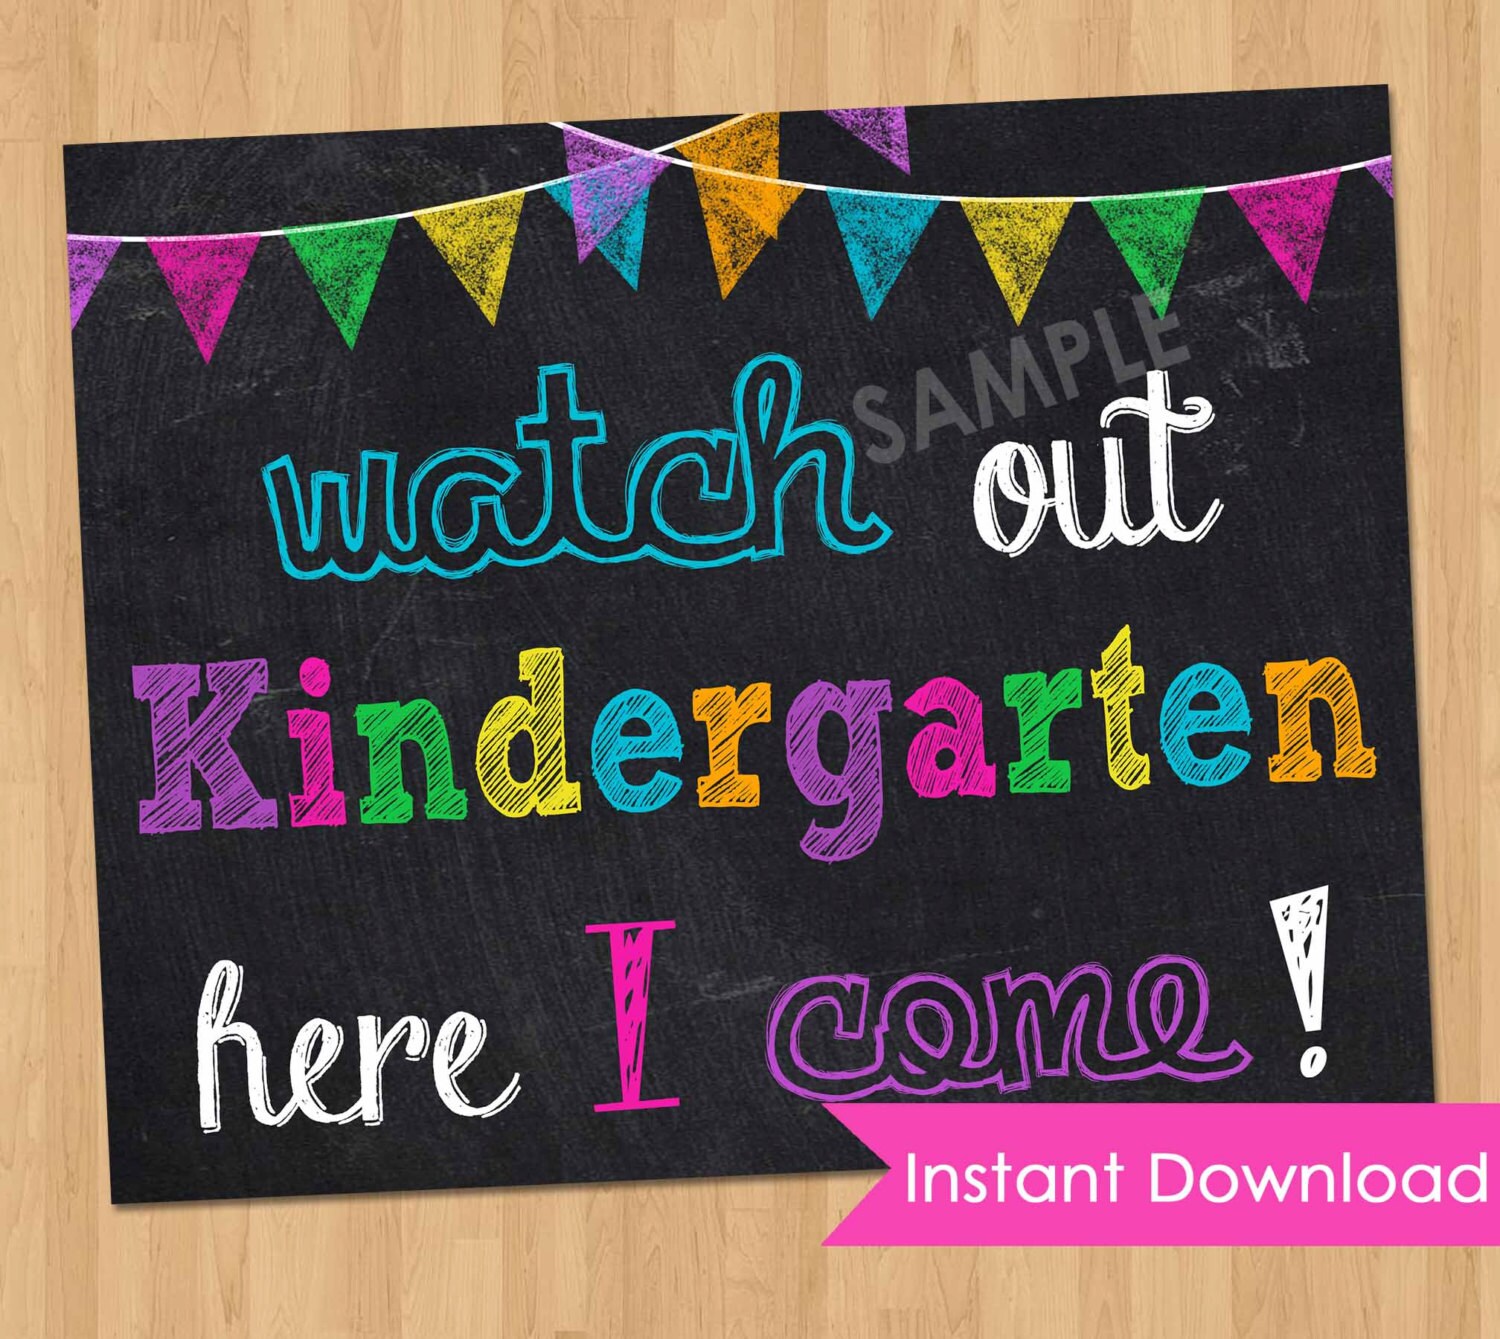 first day of kindergarten sign free